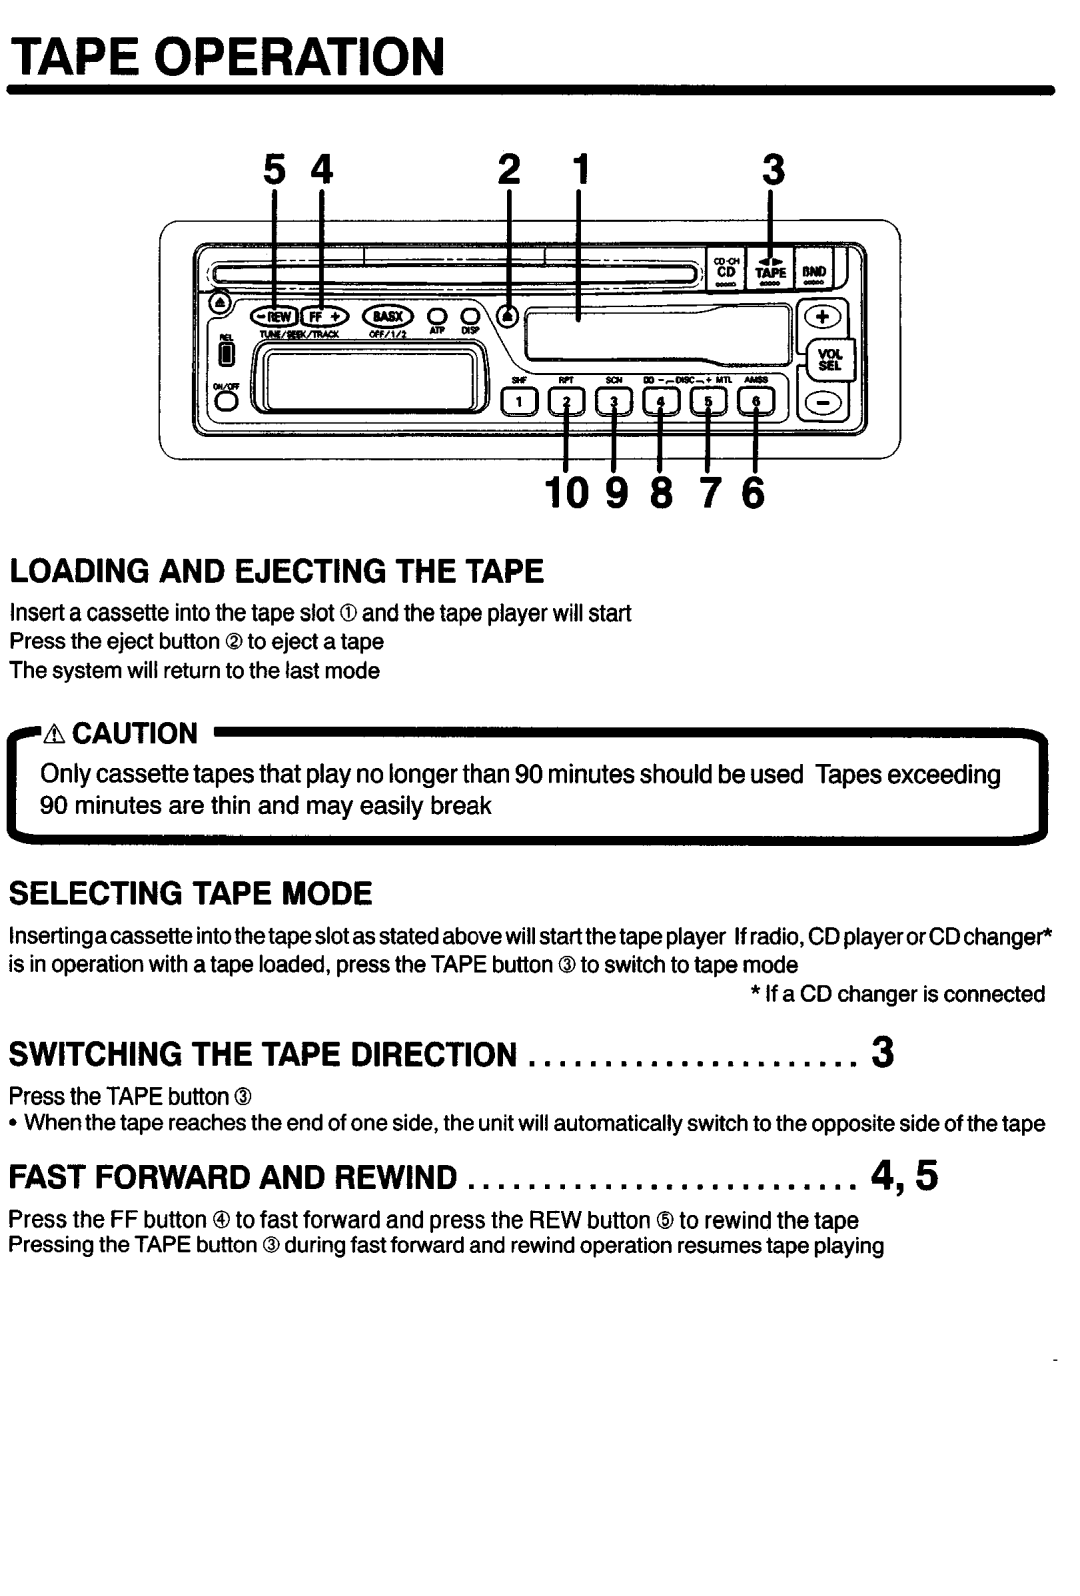 Sanyo FXCD-500 manual Tape Operation, 109876, Loading And Ejecting The Tape, Selecting Tape Mode 